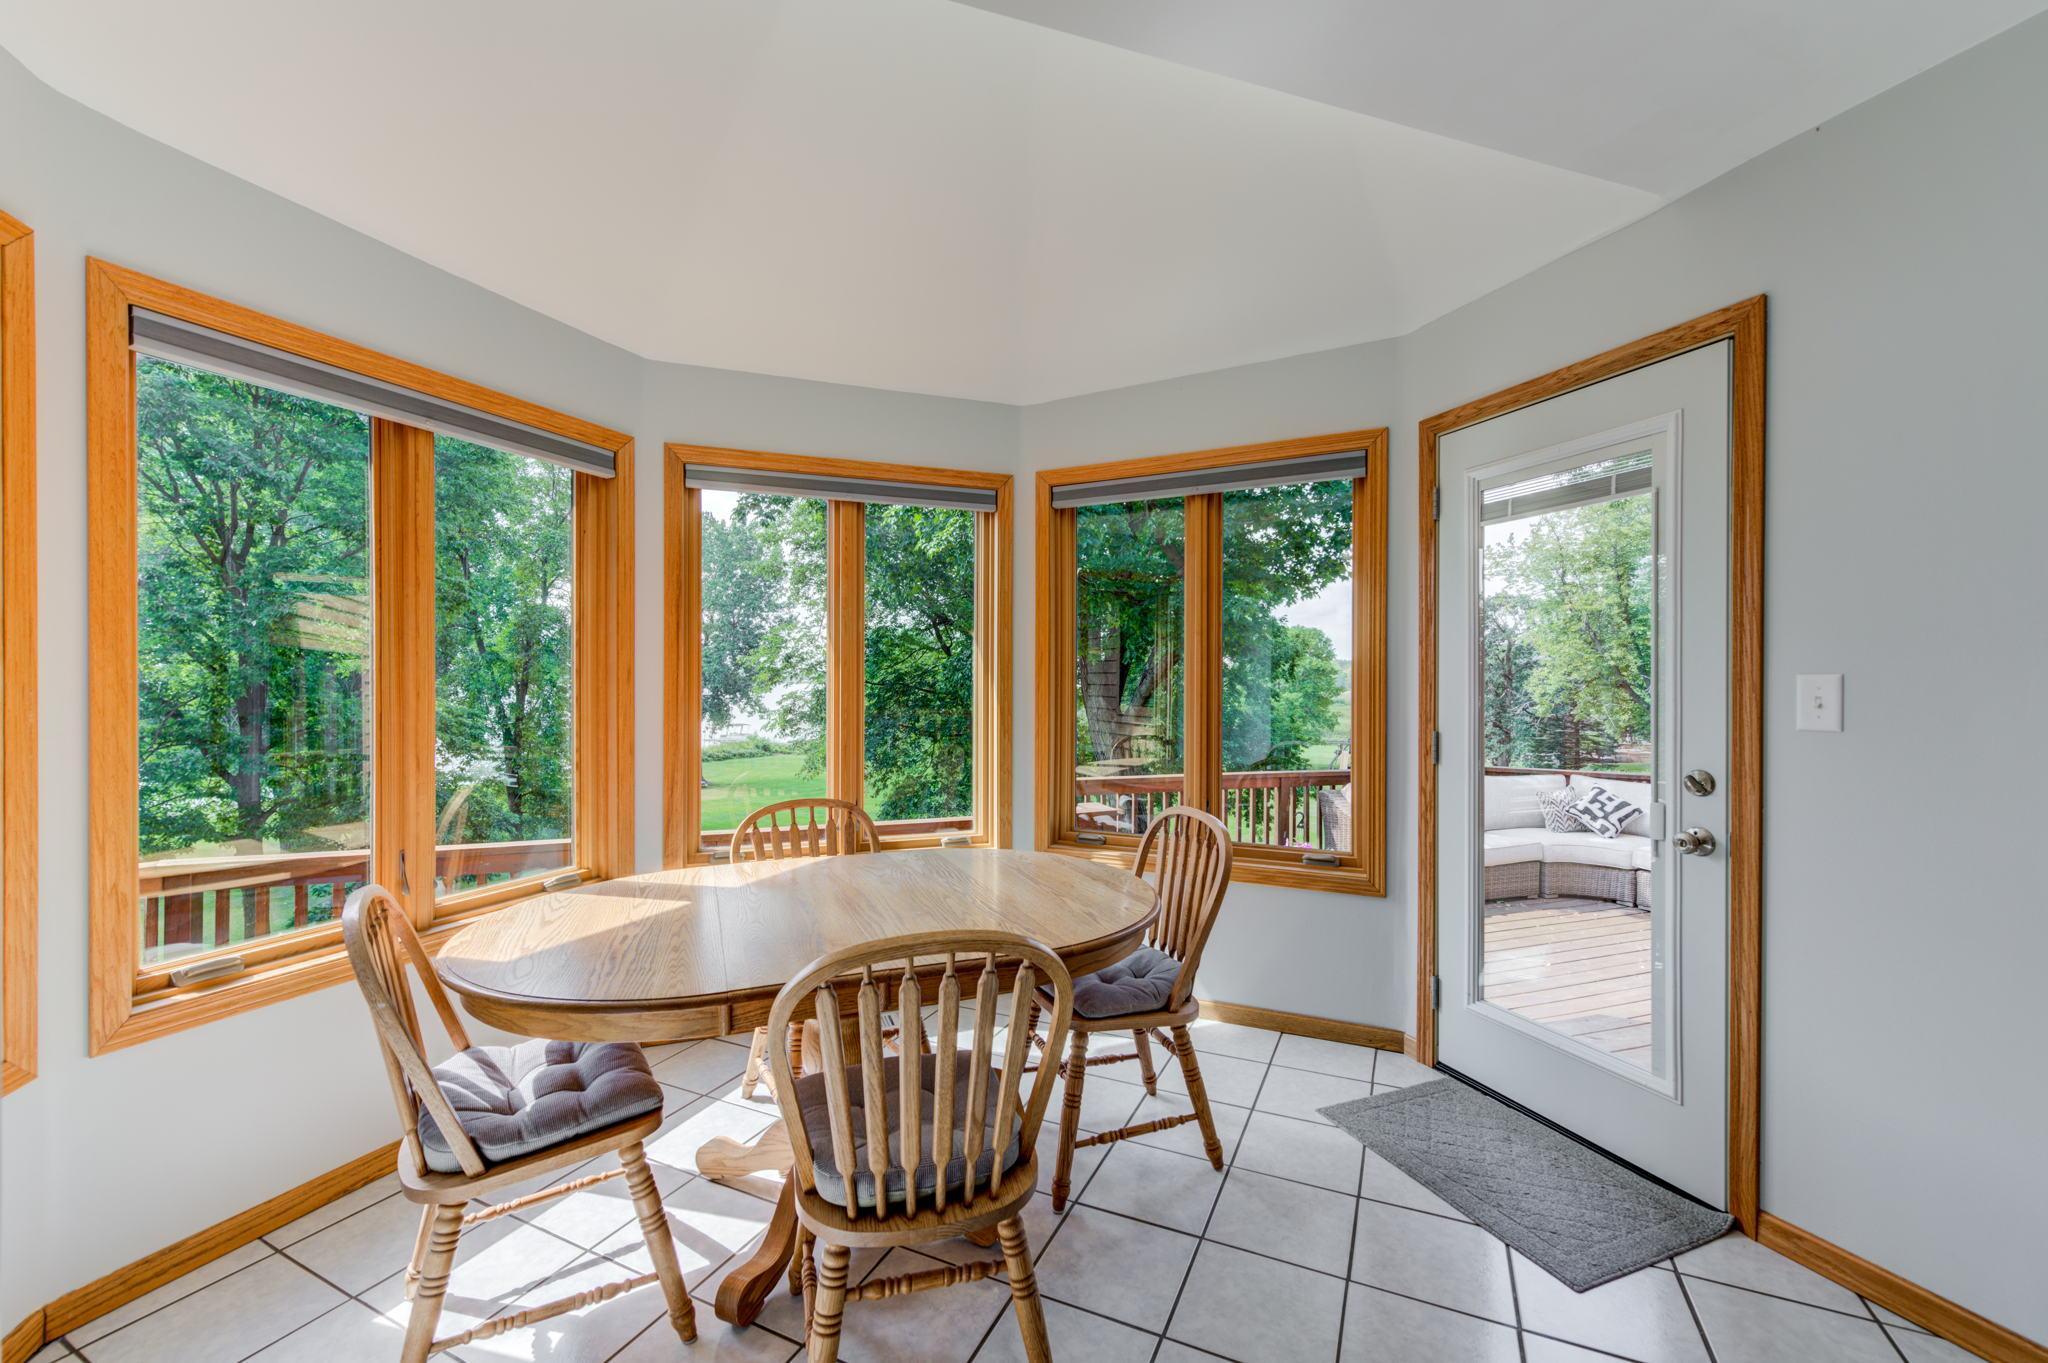 The informal dining room will quickly become one of your favorite spots in the house with the wall of windows lakeside to take in the natural beauty that this French Lake property has to offer!